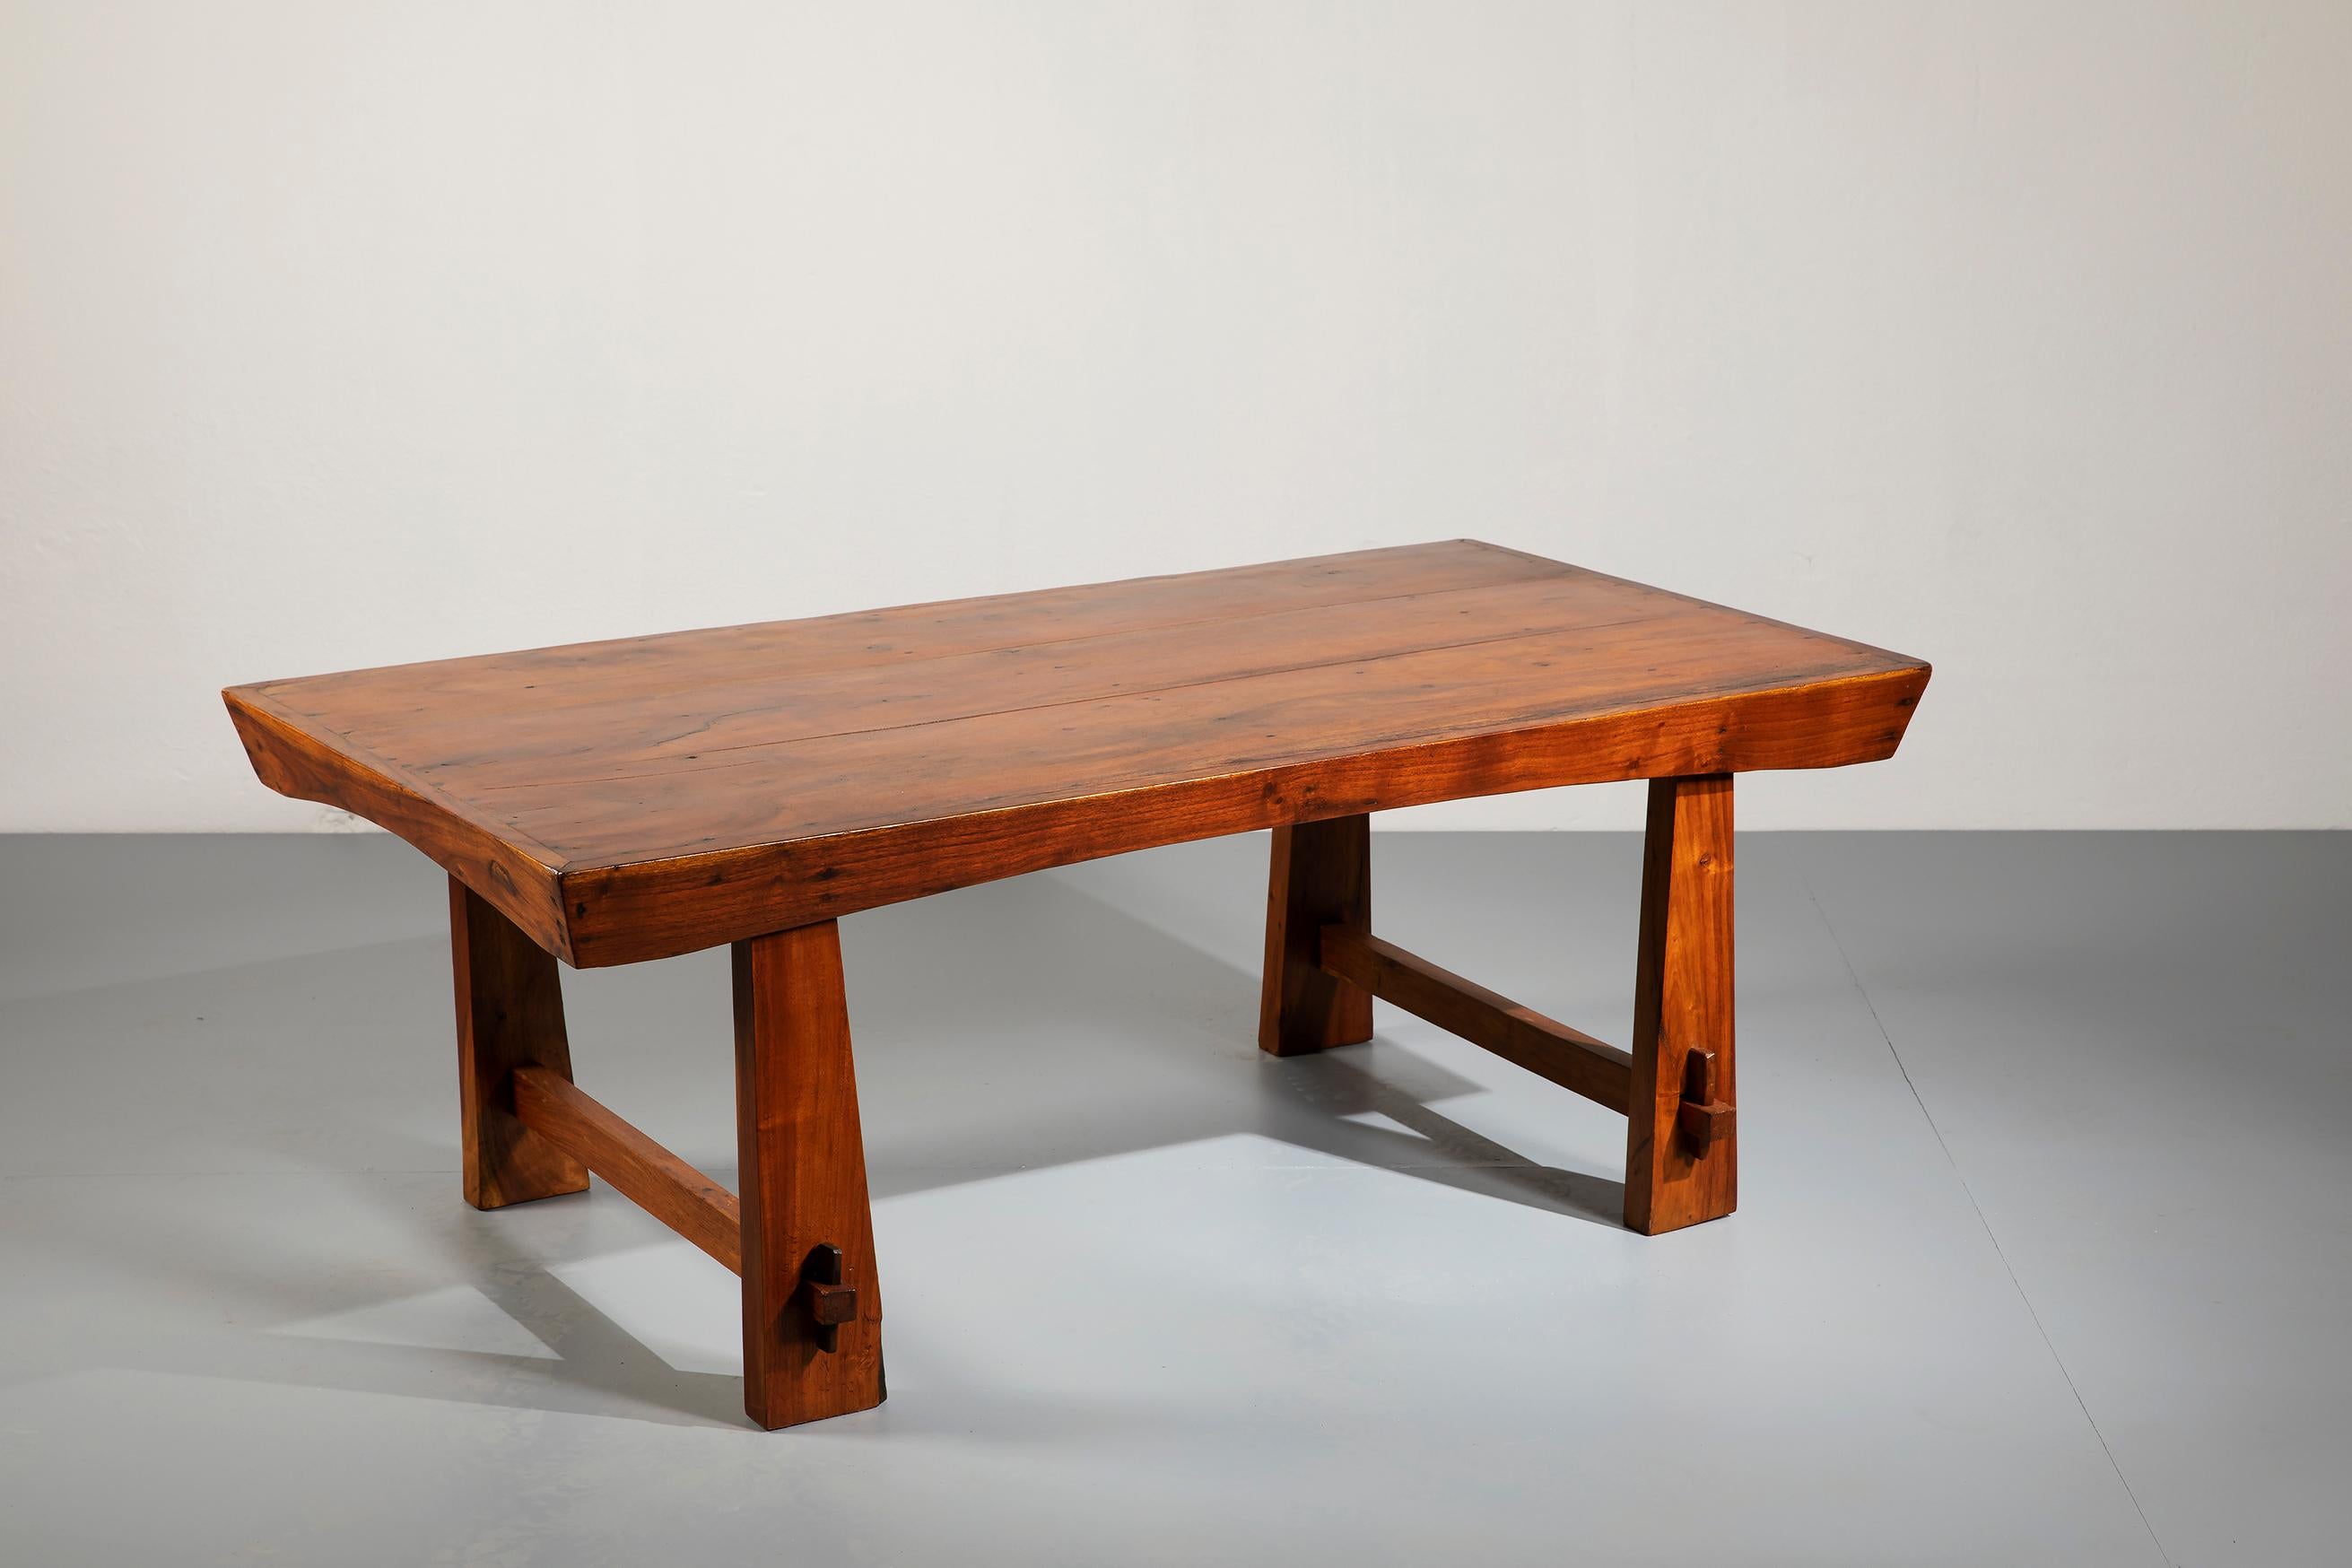 Sculptural Italian Folk Art coffee table from 1950s.
The table is in solid walnut and is completely restored.